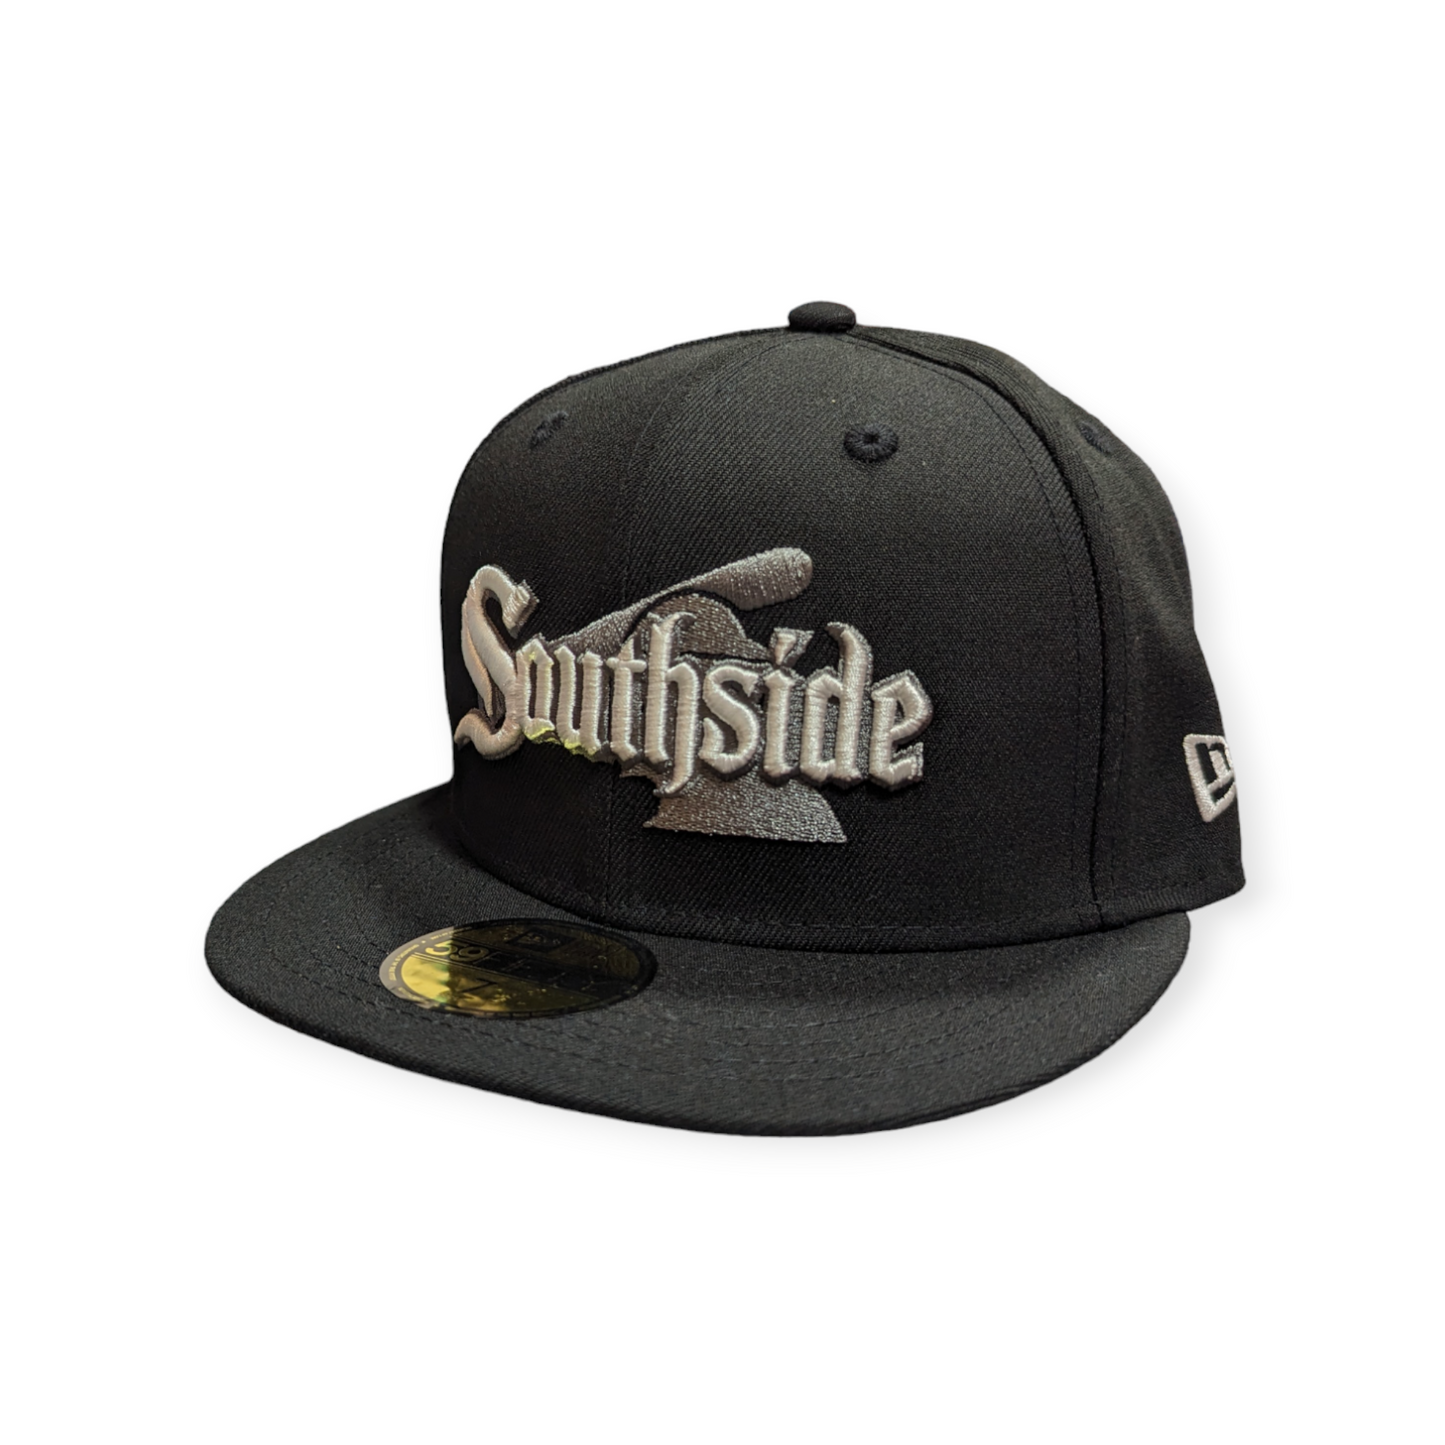 Chicago White Sox New Era Southside Batterman Black 59FIFTY Fitted Hat